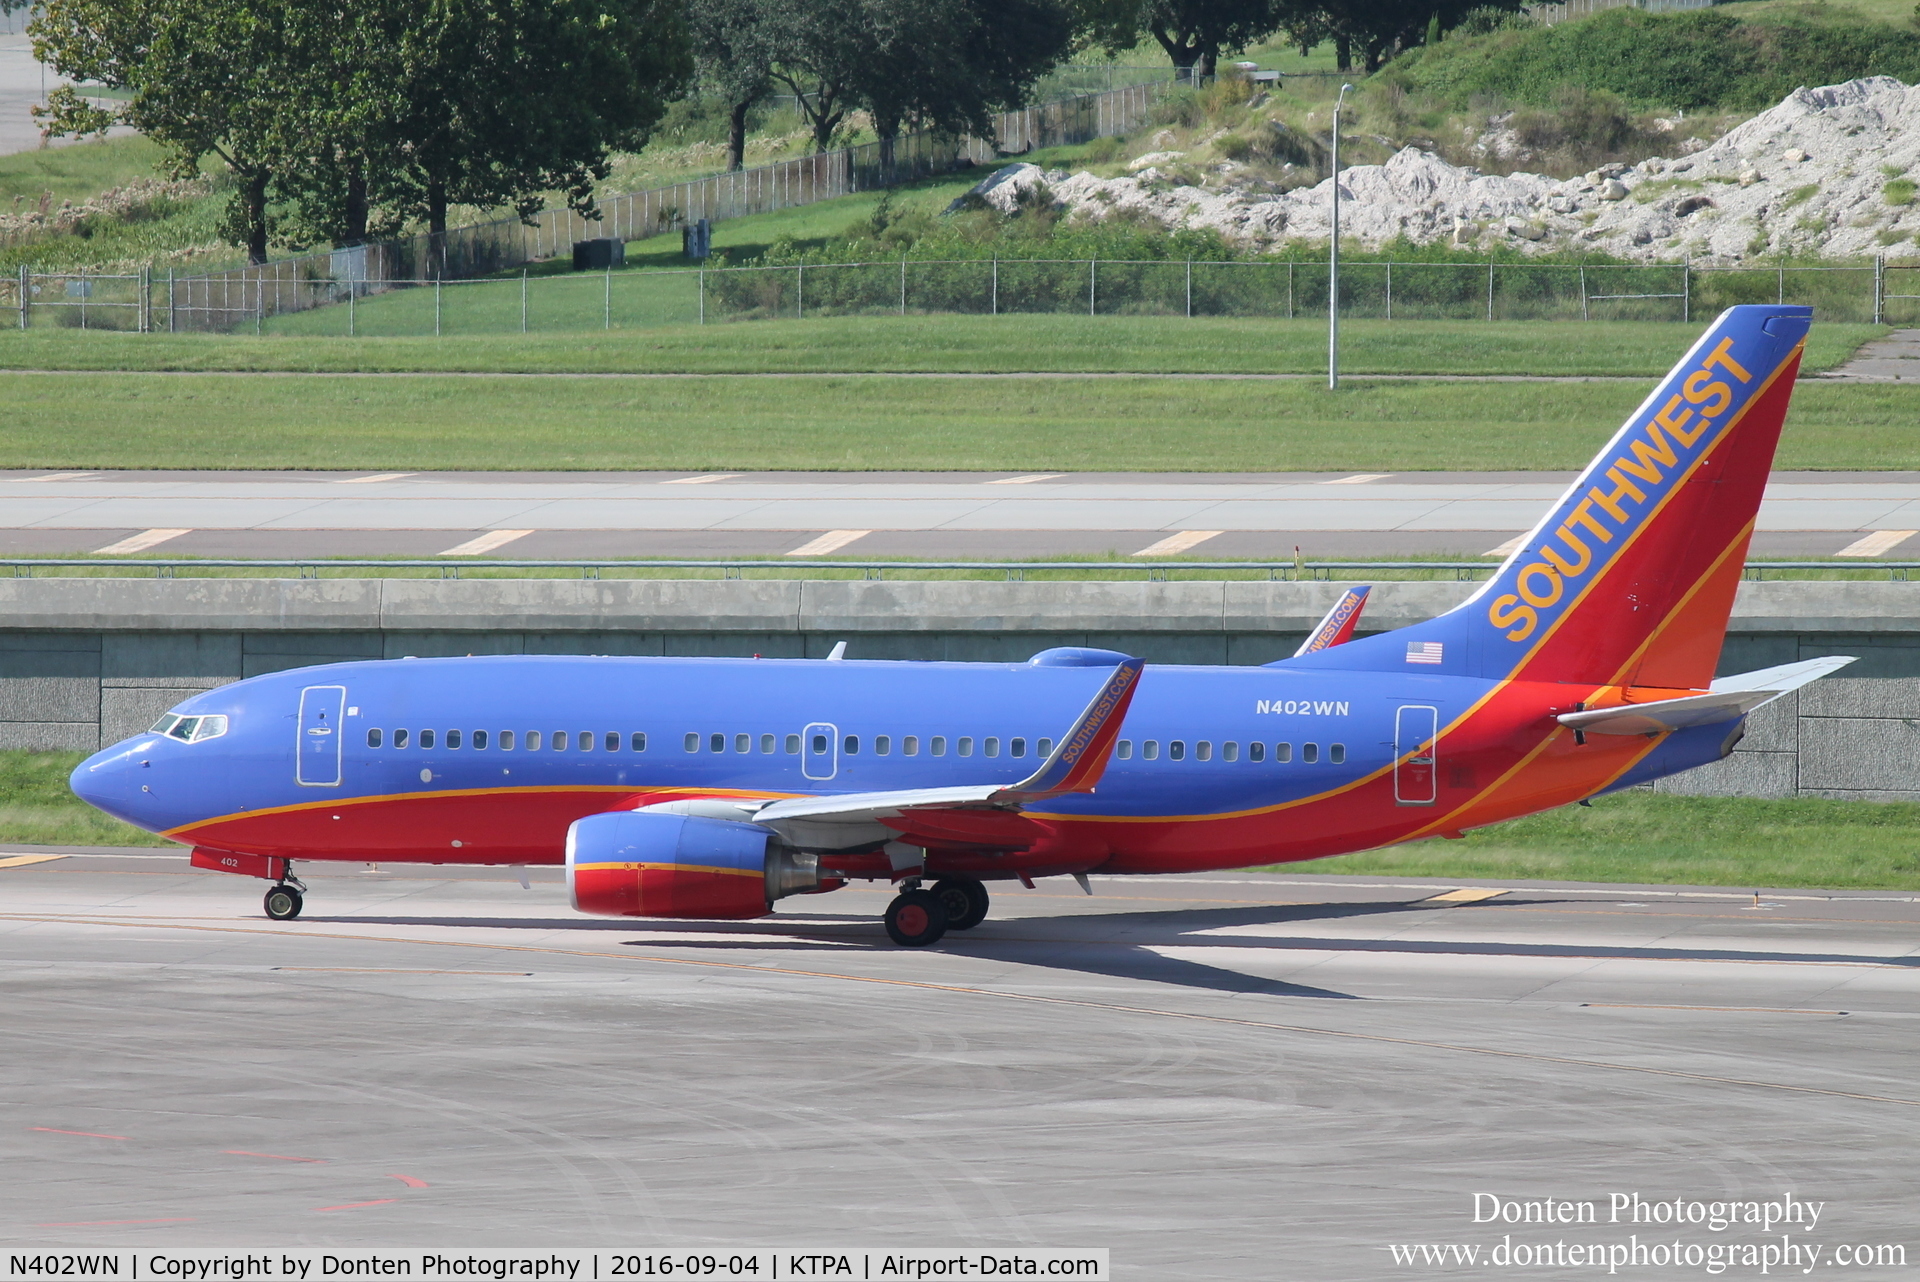 N402WN, 2001 Boeing 737-7H4 C/N 29814, Southwest Flight 588 (N402WN) taxis for departure at Tampa International Airport prior to flight to Louisville International Airport